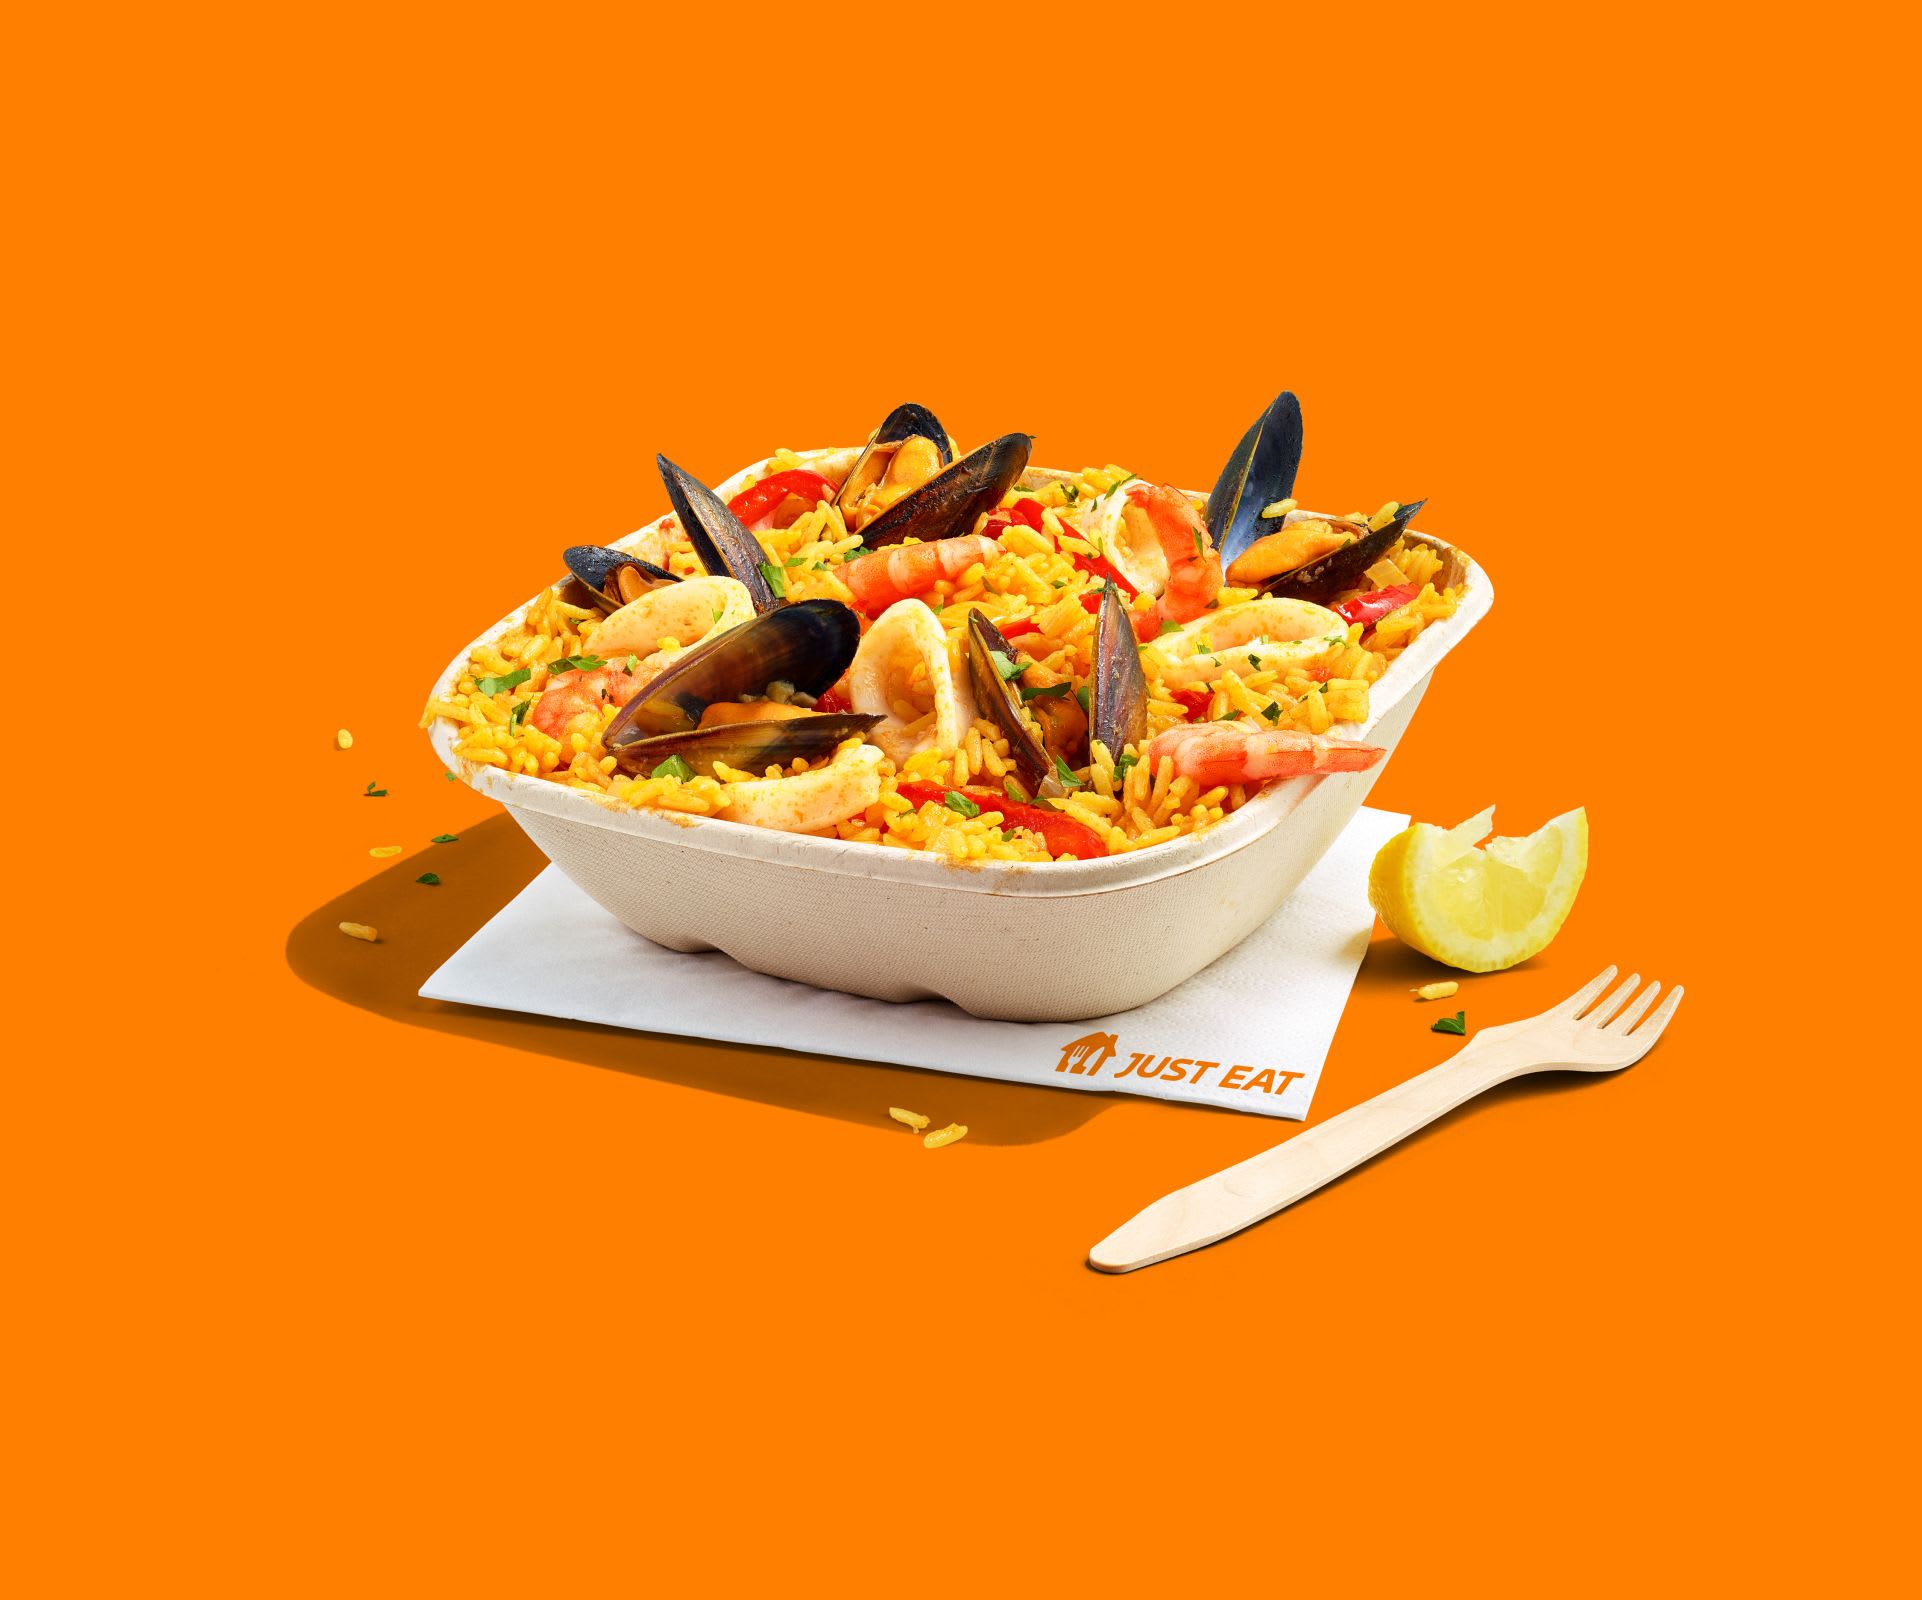 Spanish Takeaways and Restaurants Delivering Near Me | Order from Just Eat